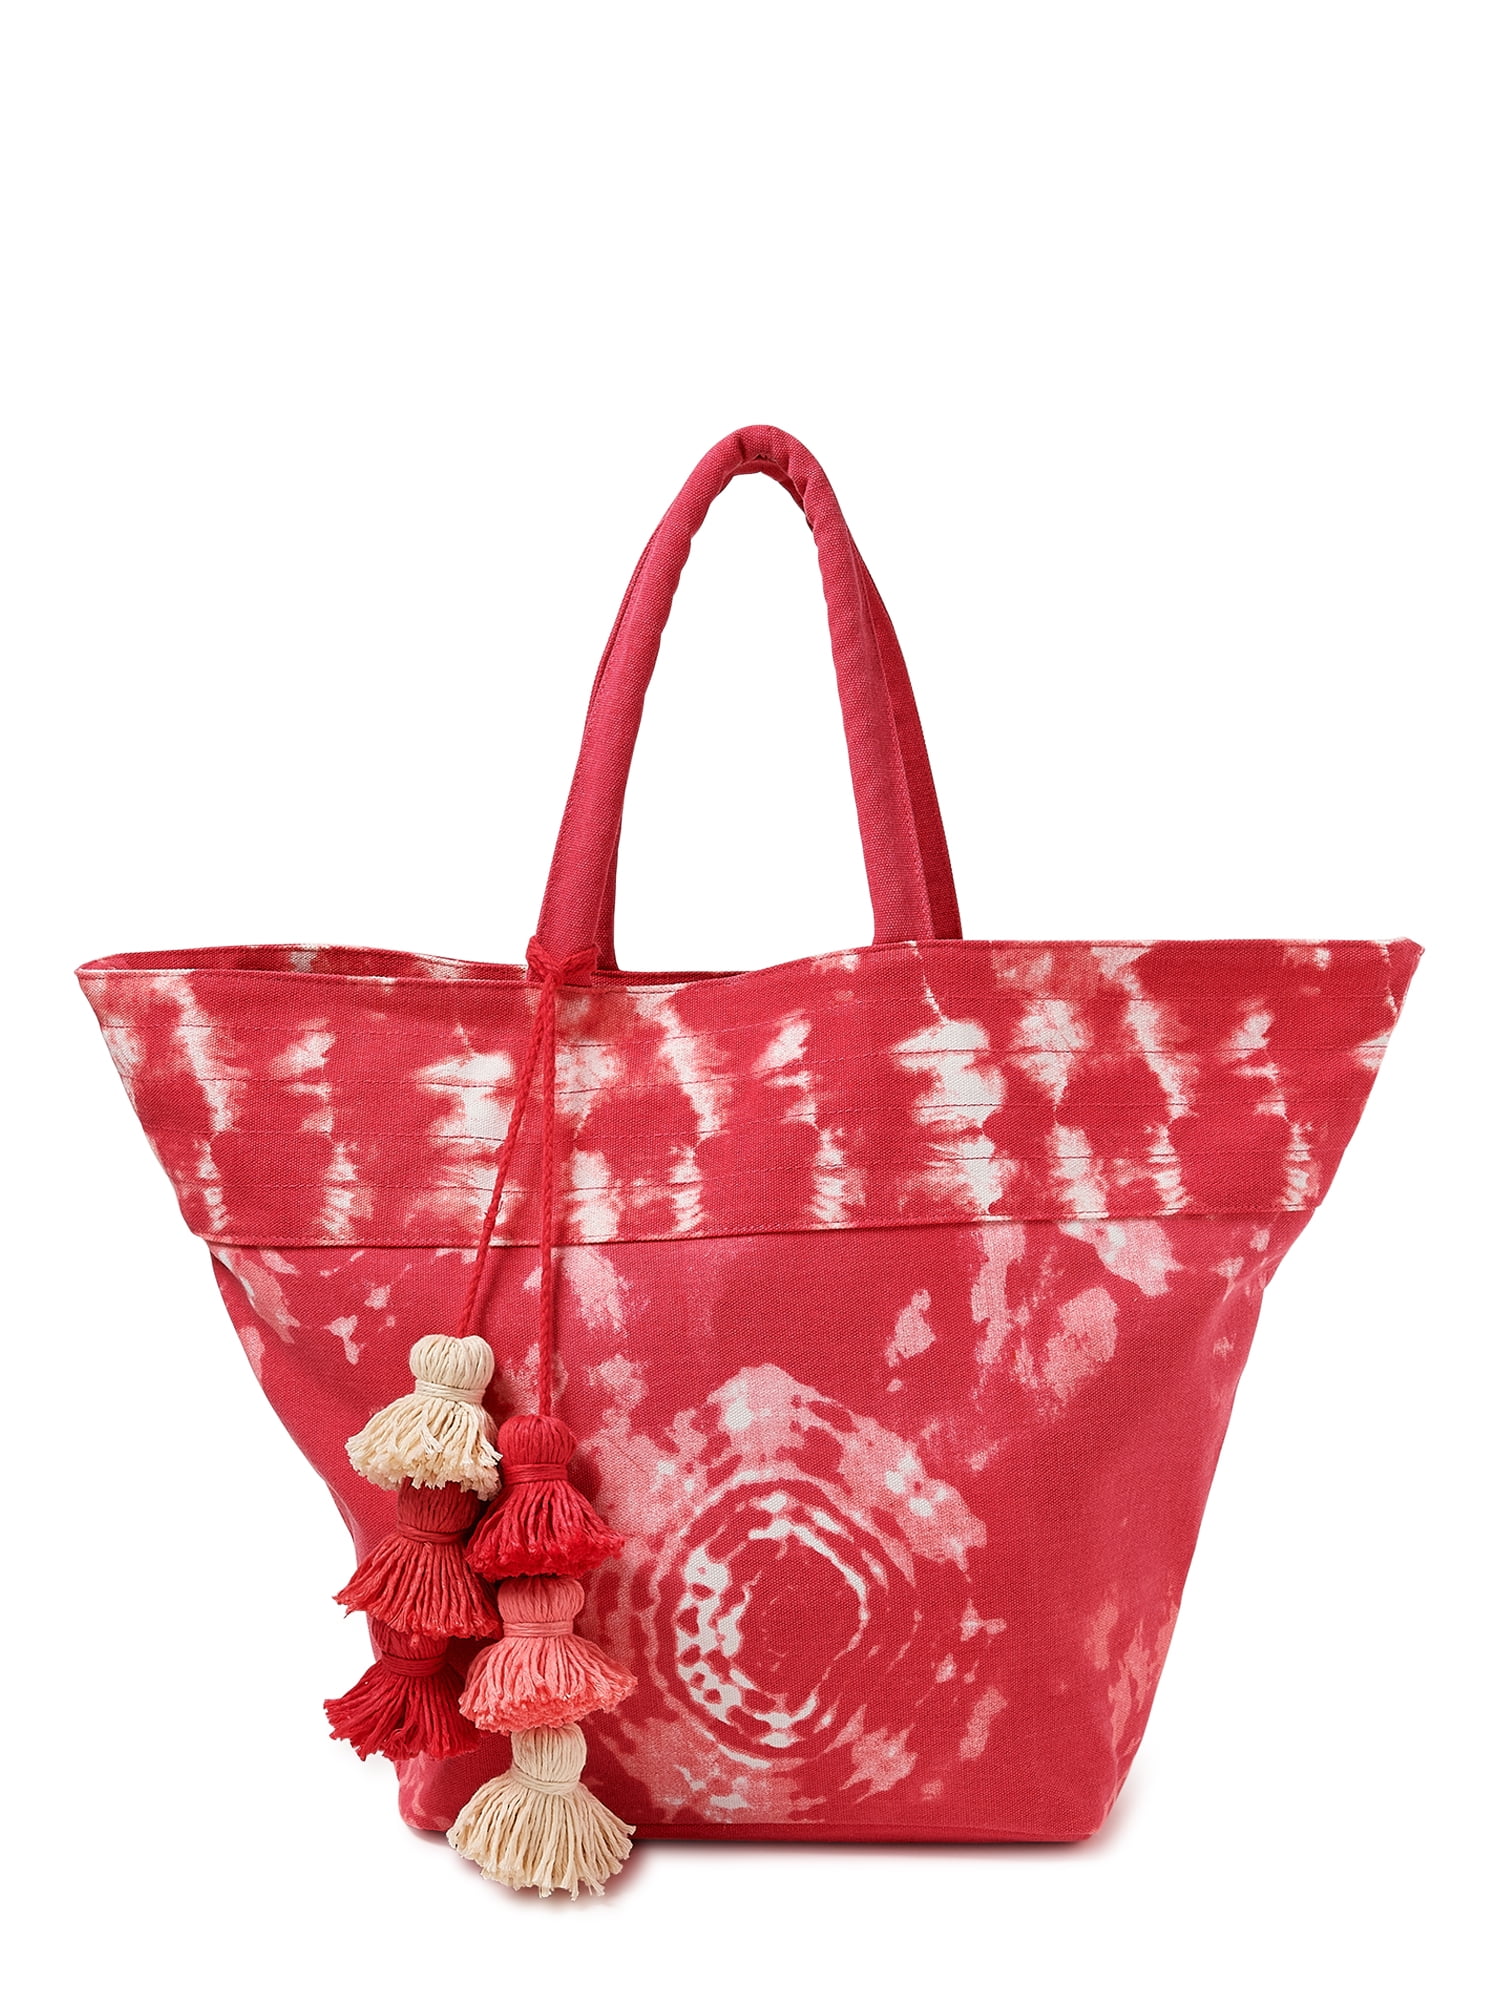 Soft Tote Bag Super Cute Coral And Fish Cute Handbags Fashion Women Bag Pu Leather Top Handle Satchel Womans Carry On Bag